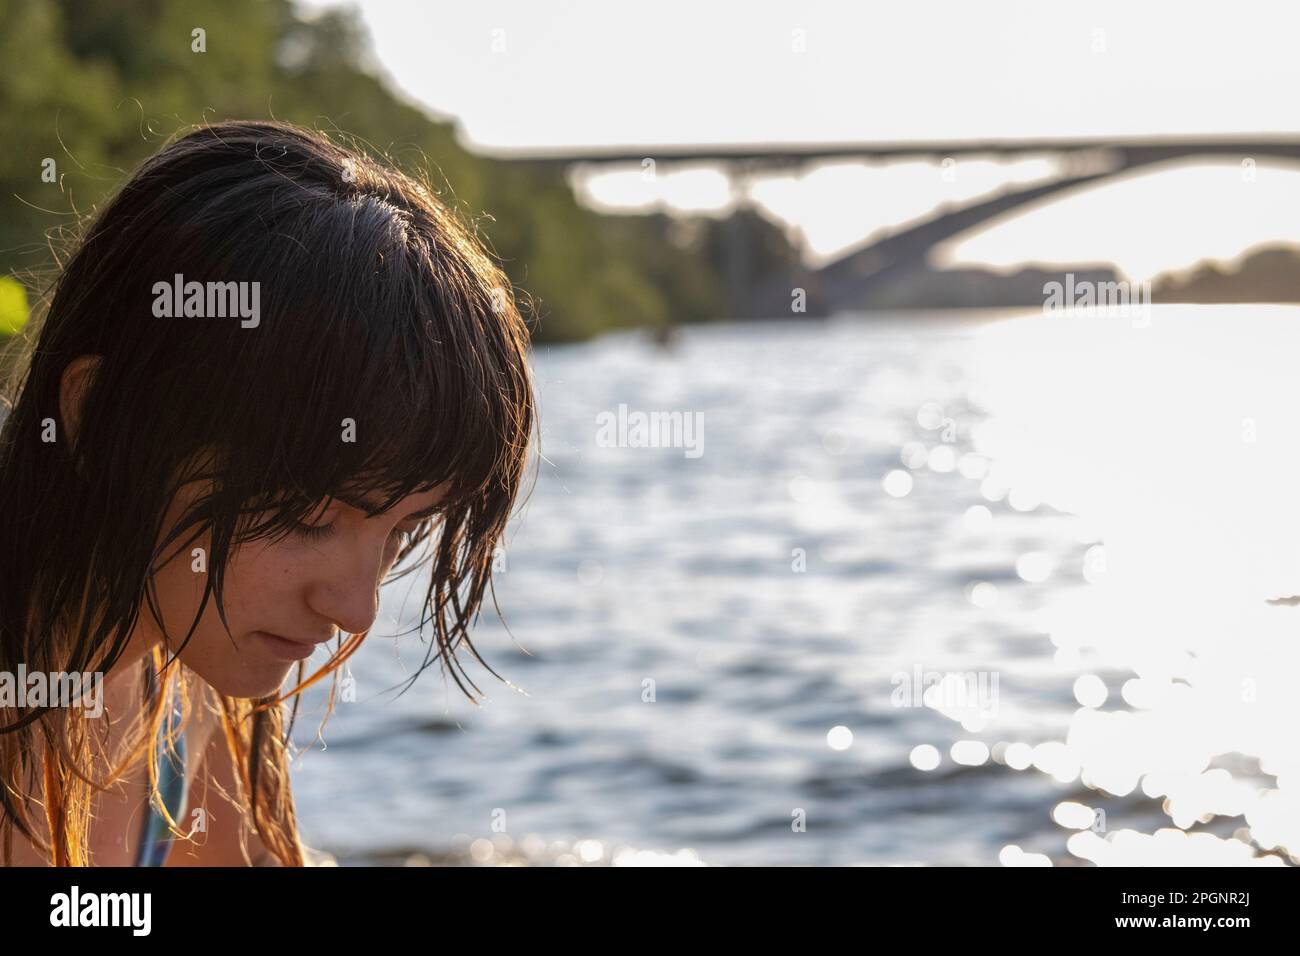 Woman with bangs in front of sea Stock Photo